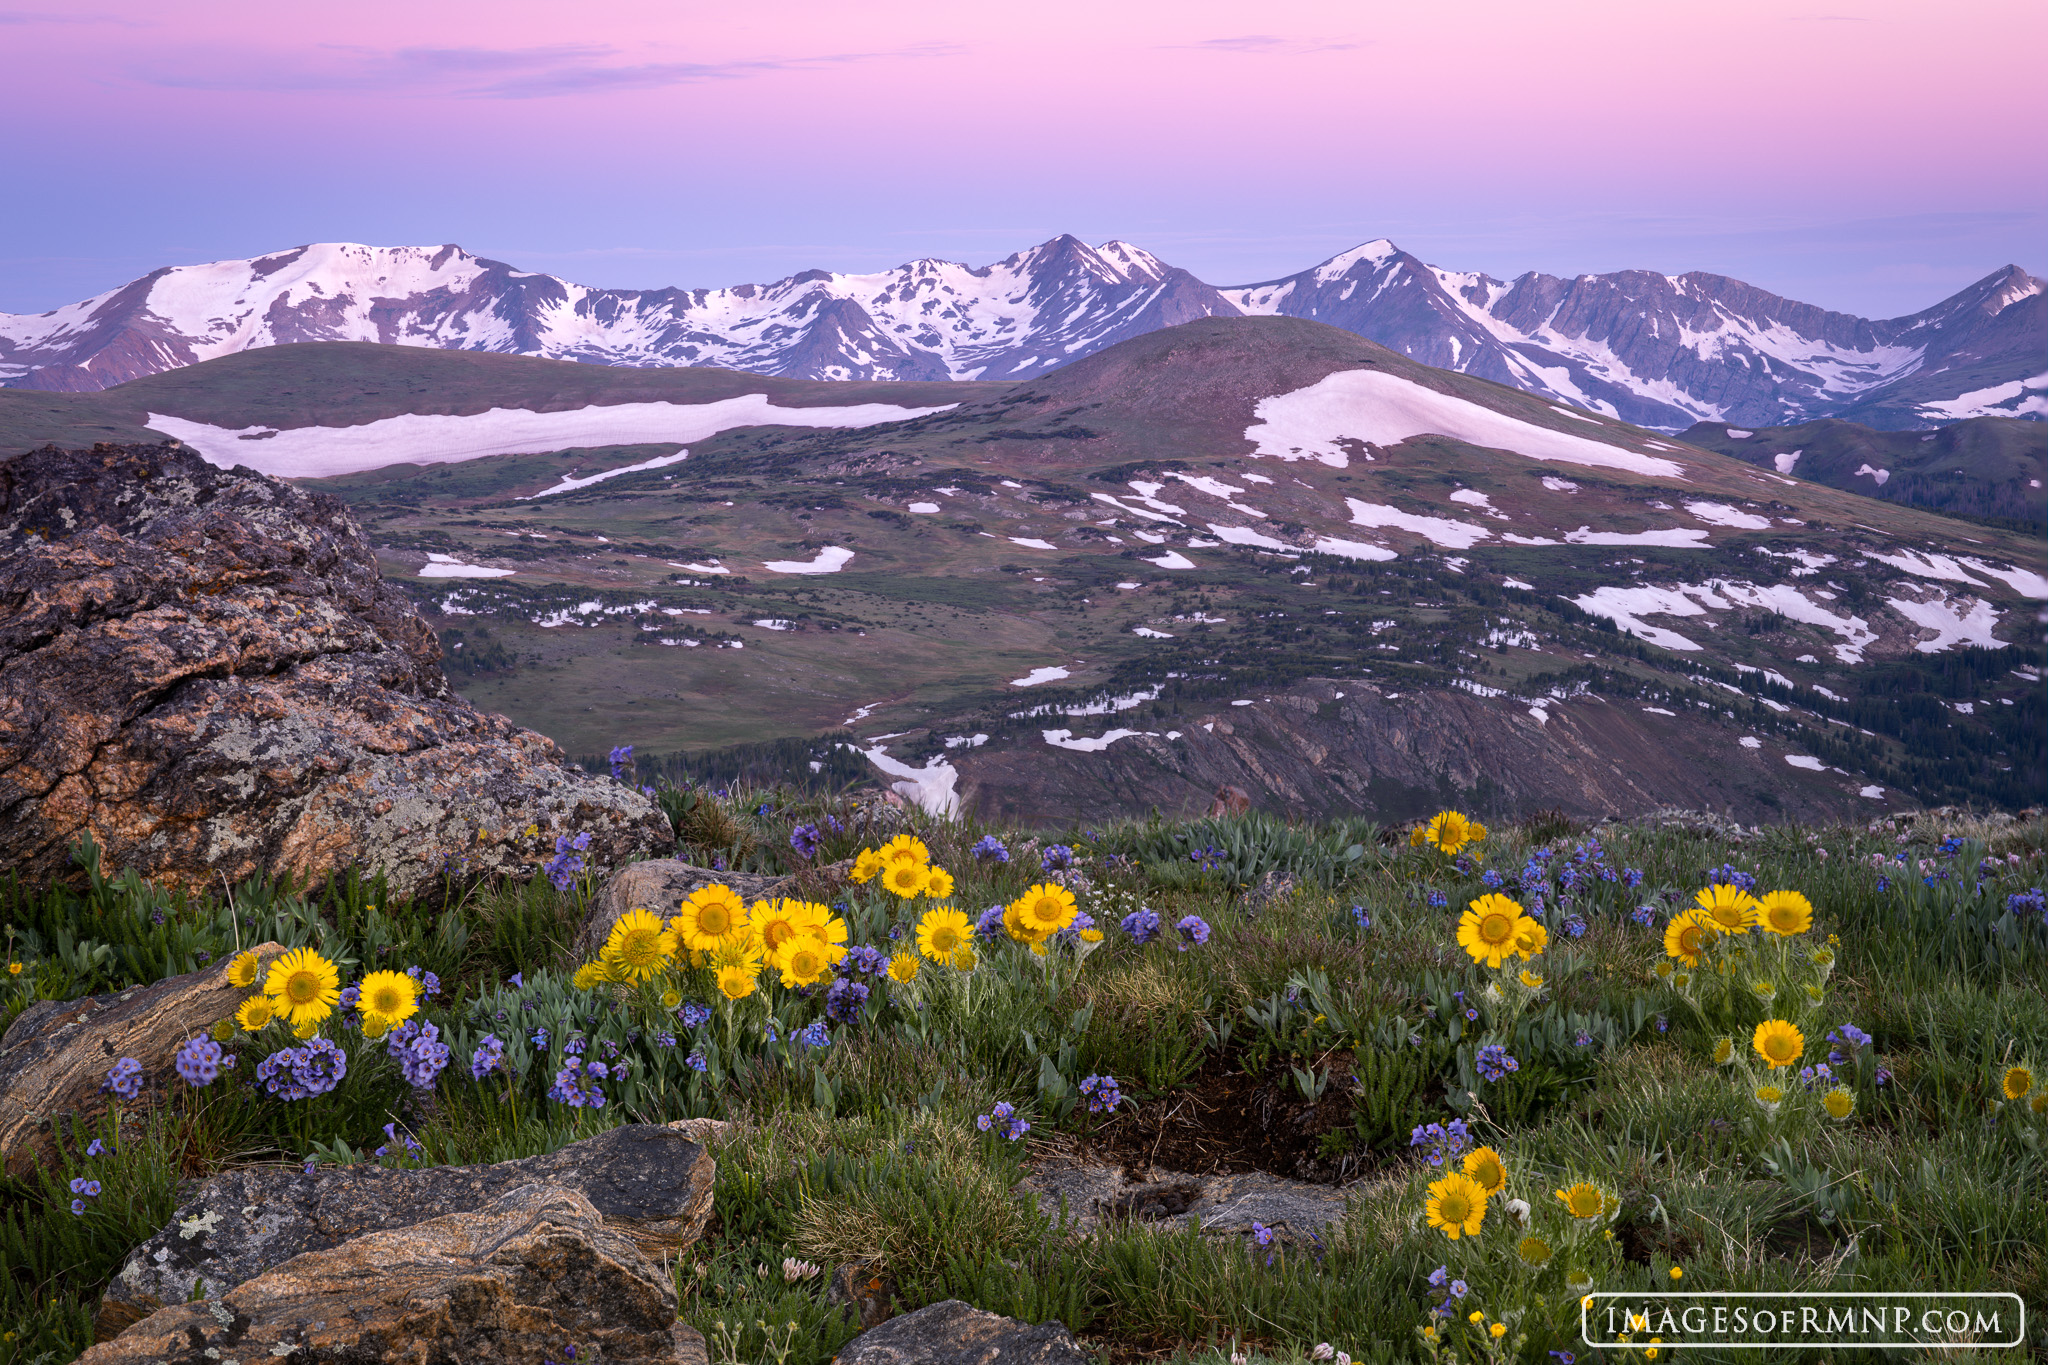 Wildflowers abound in the tundra in mid-summer in Rocky Mountain National Park.